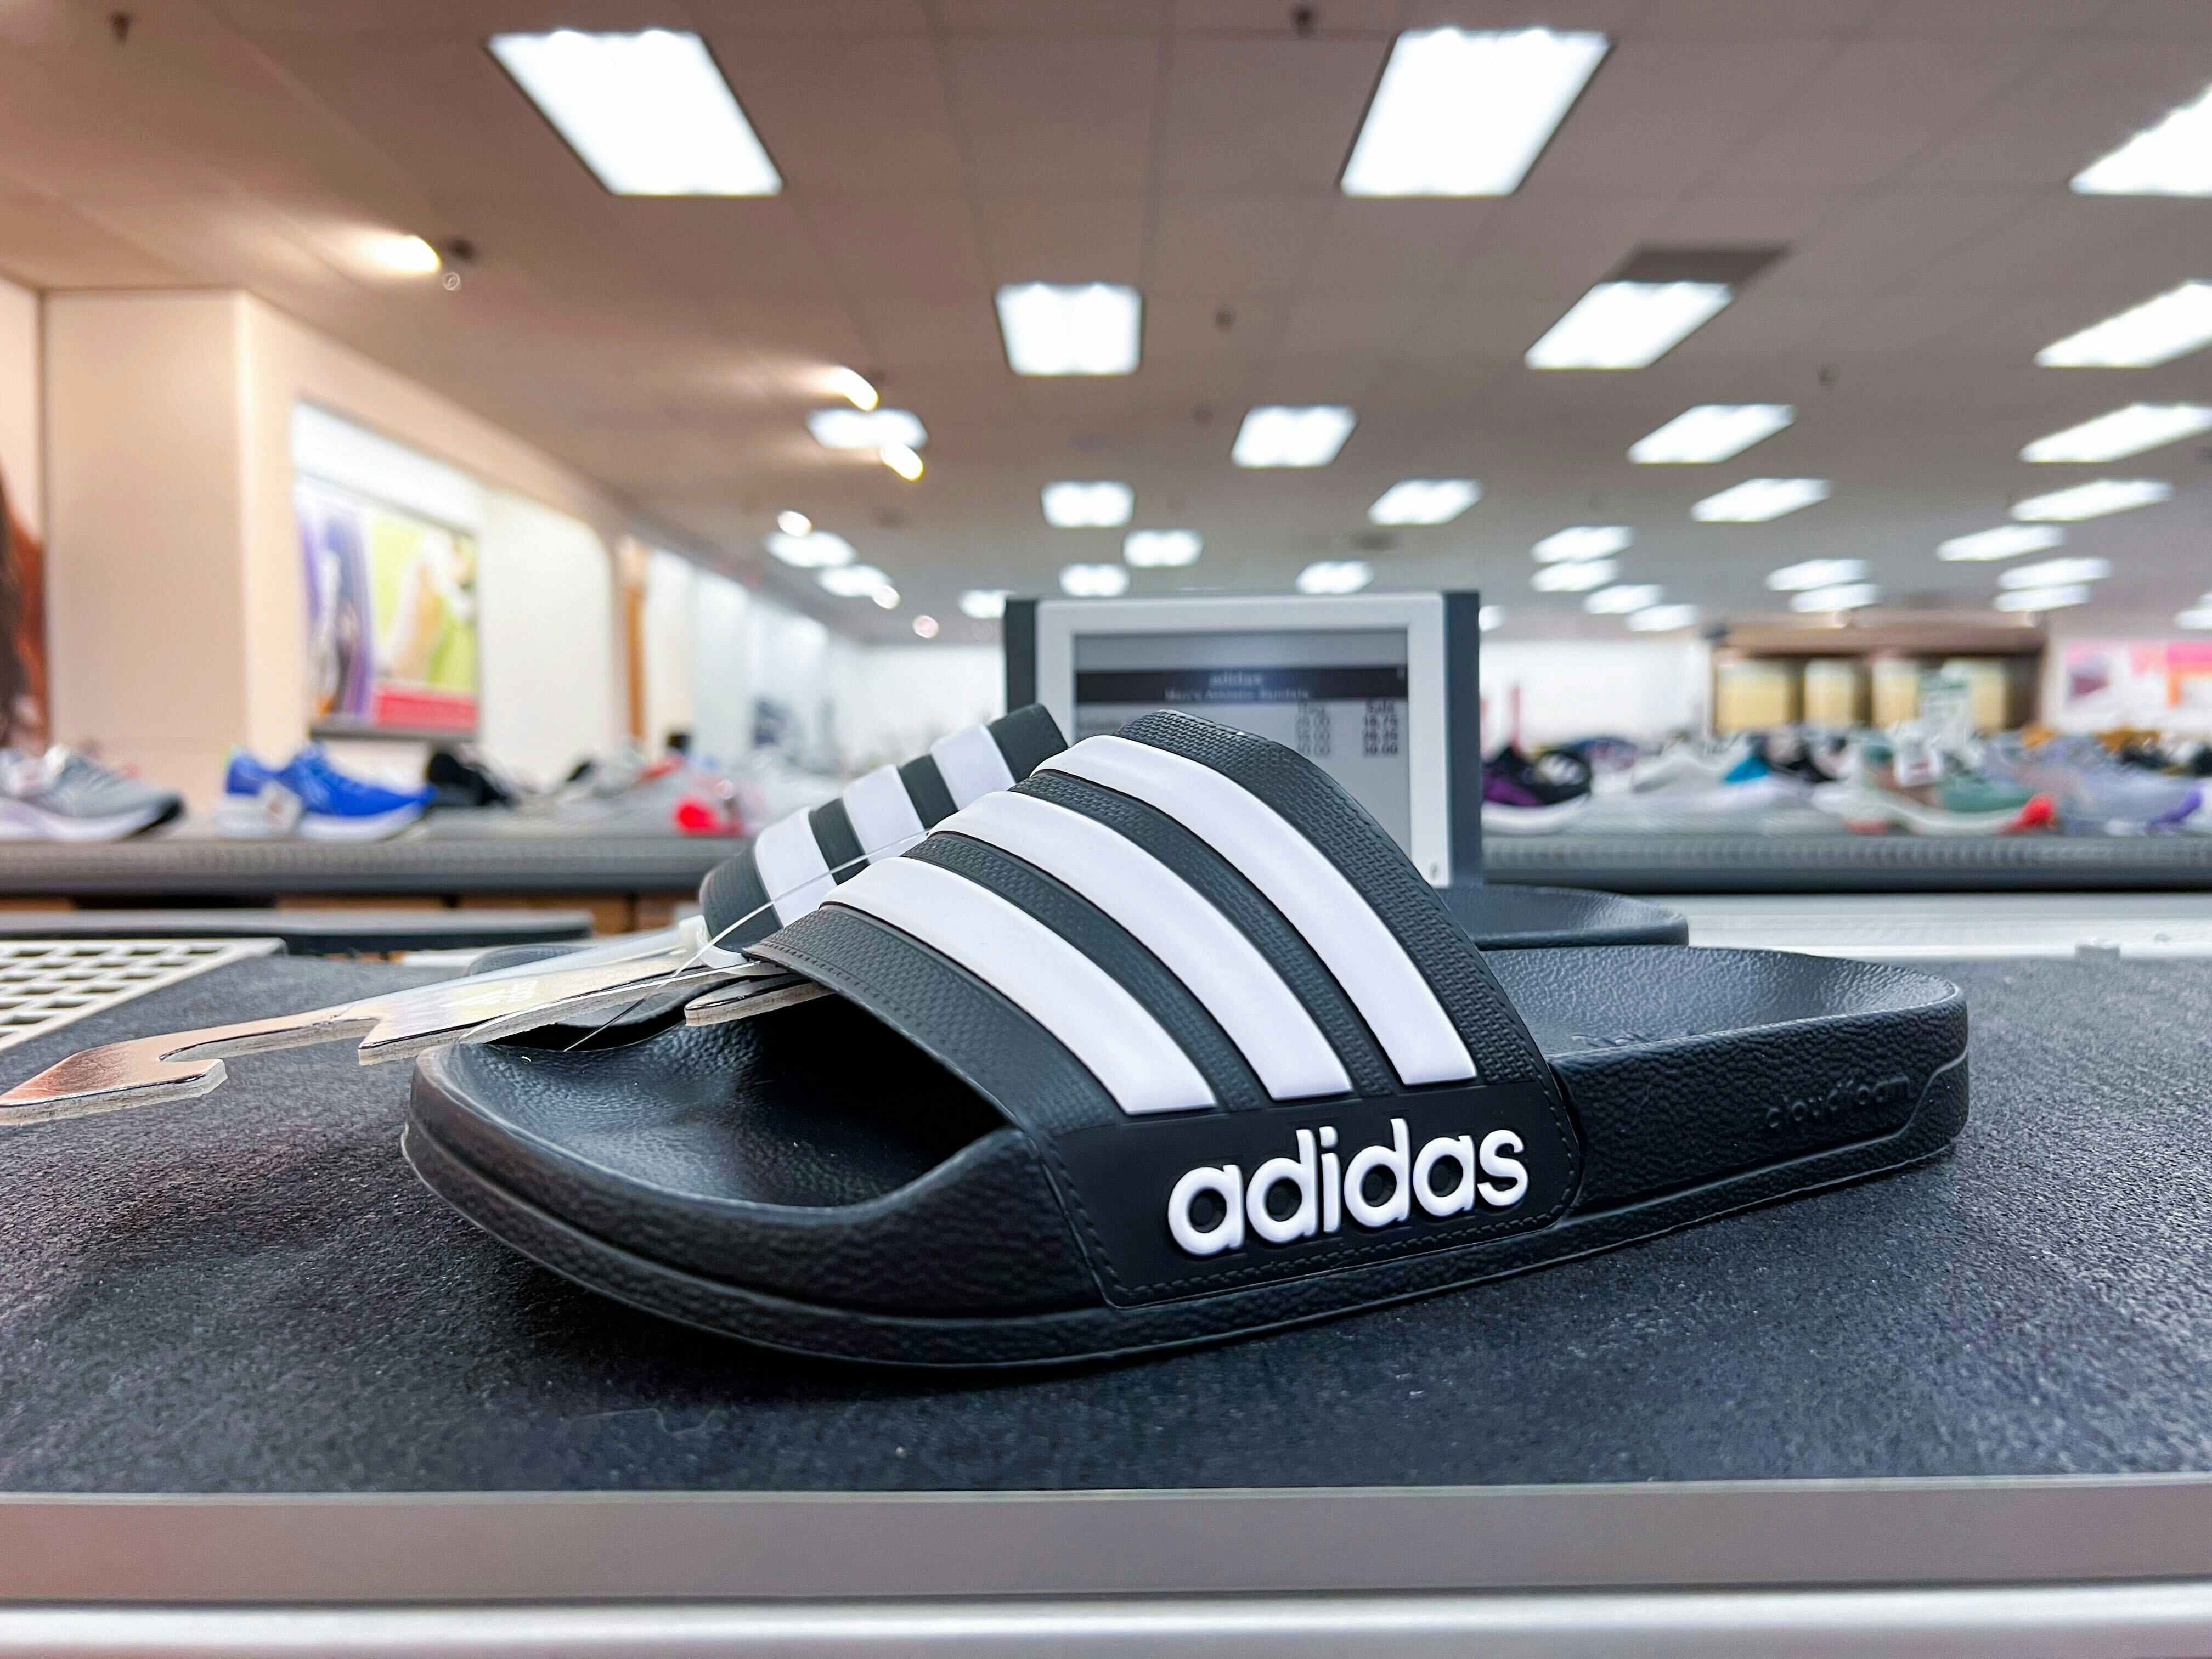 Summer Sale at Adidas: $13 Slides, $30 Sneakers, $7 Kids' Tees, and More